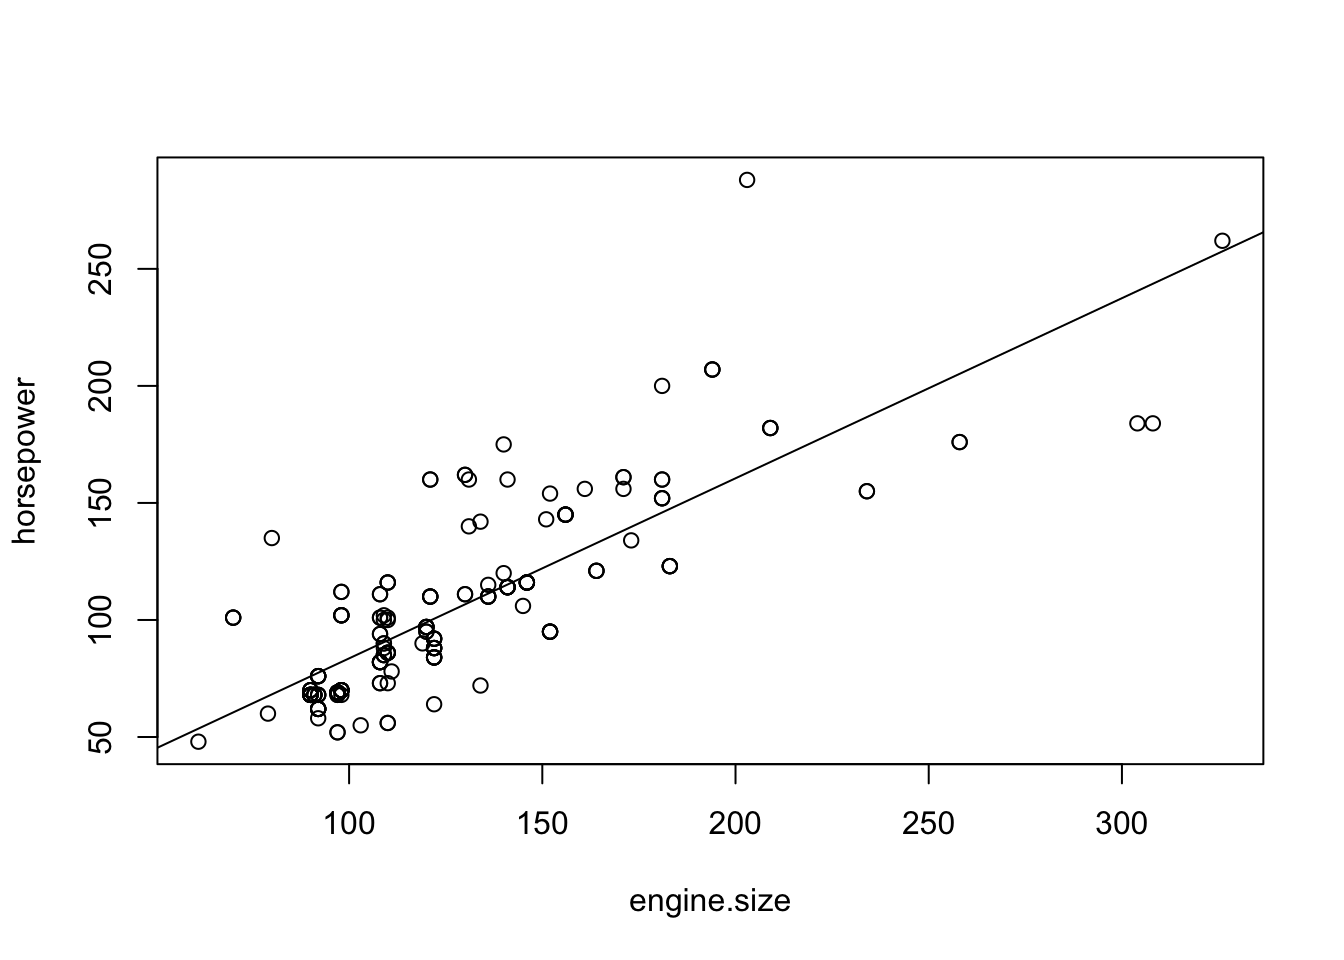 A Regression Model of Power versus Engine Size